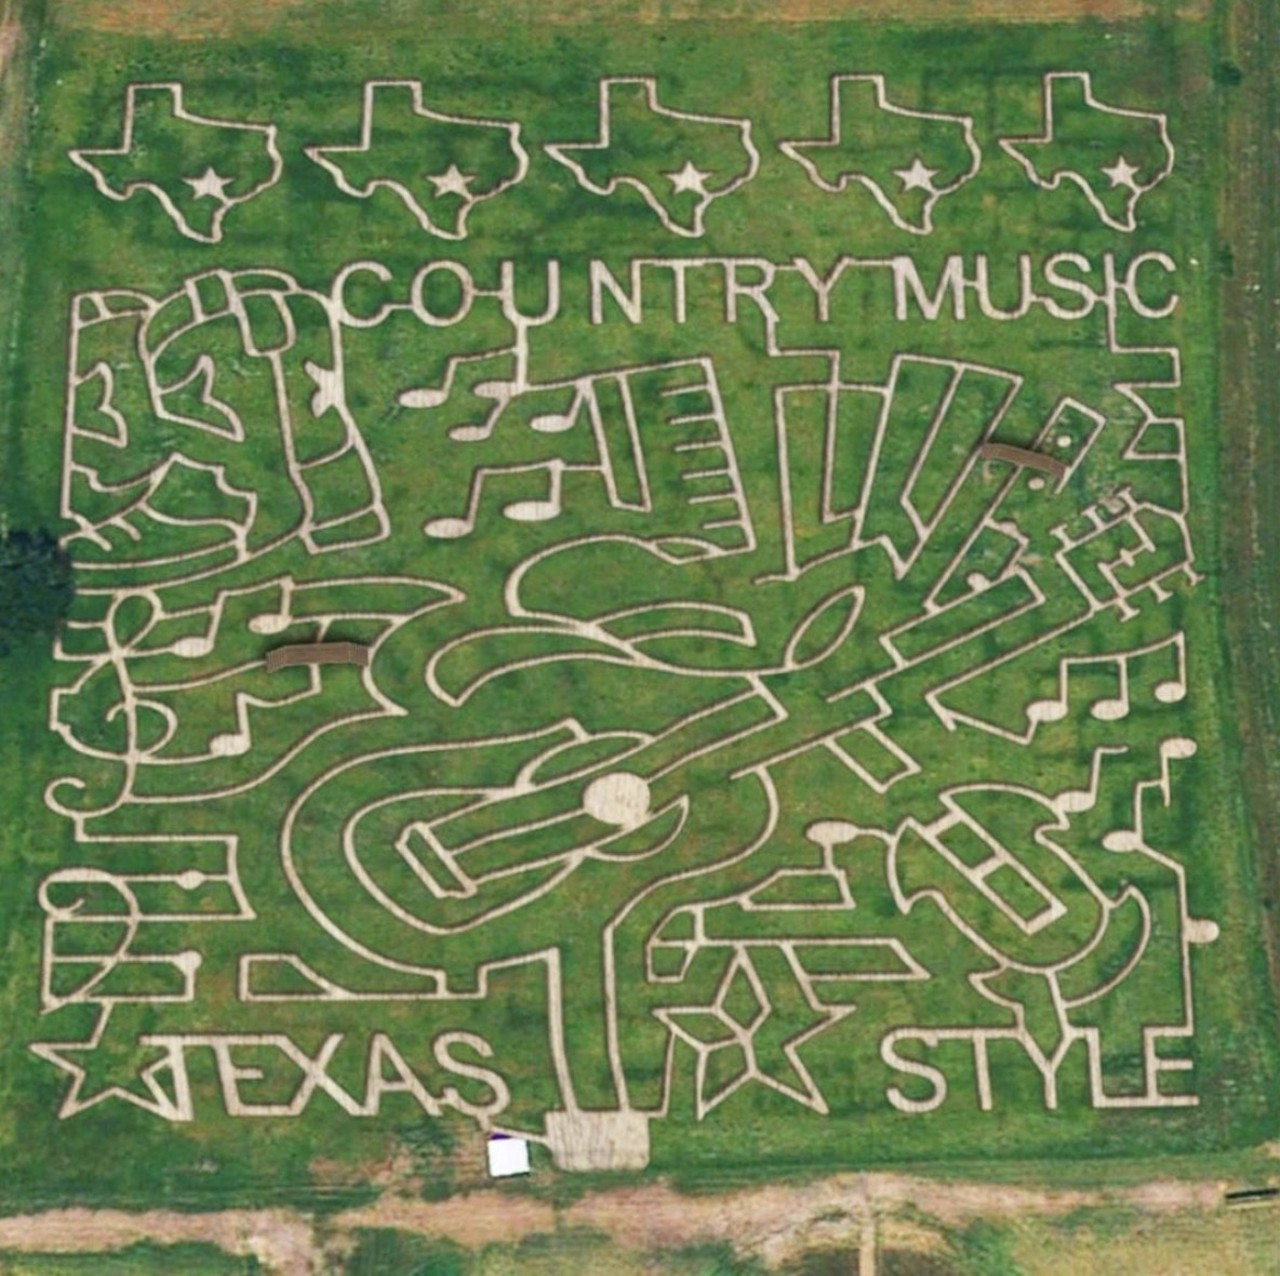 South Texas Maize at Graff 7A Ranch
911 US Hwy 90 East, Hondo, (830) 741-3968, graff7aranch.com
Get ready to rock out in this 7-acre corn maze, which is themed on country music this year. The ranch also has a pumpkin patch, farm animals and other fun activities.This year's fall season runs through November 21.
Photo via Instagram / graff7aranch